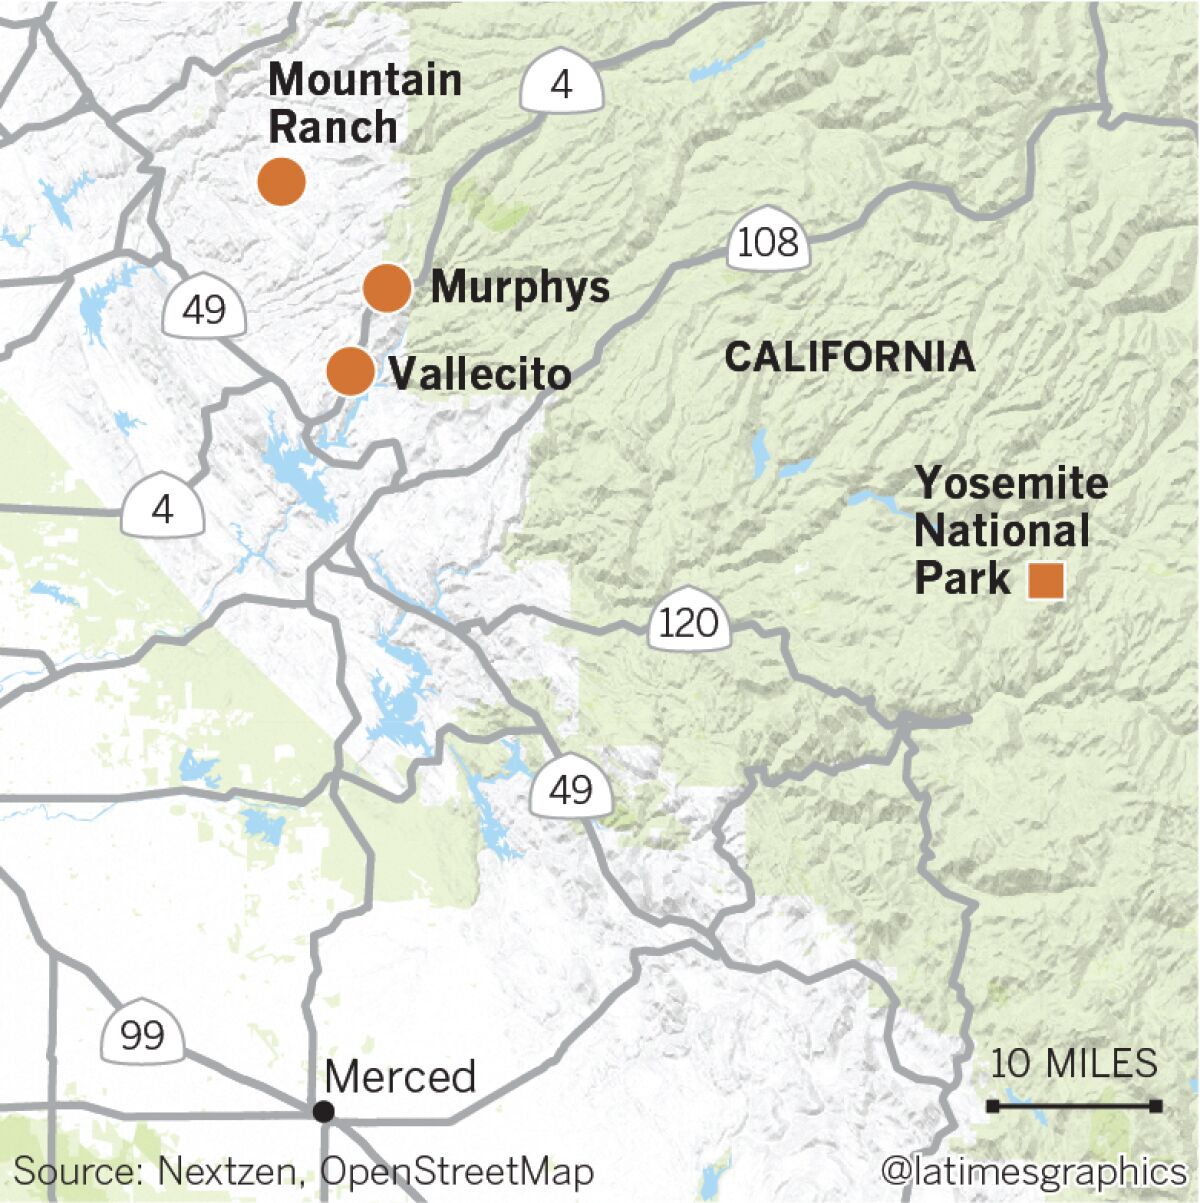 Map of Mountain Ranch, Murphys, Vallecito and Yosemite National Park in California.